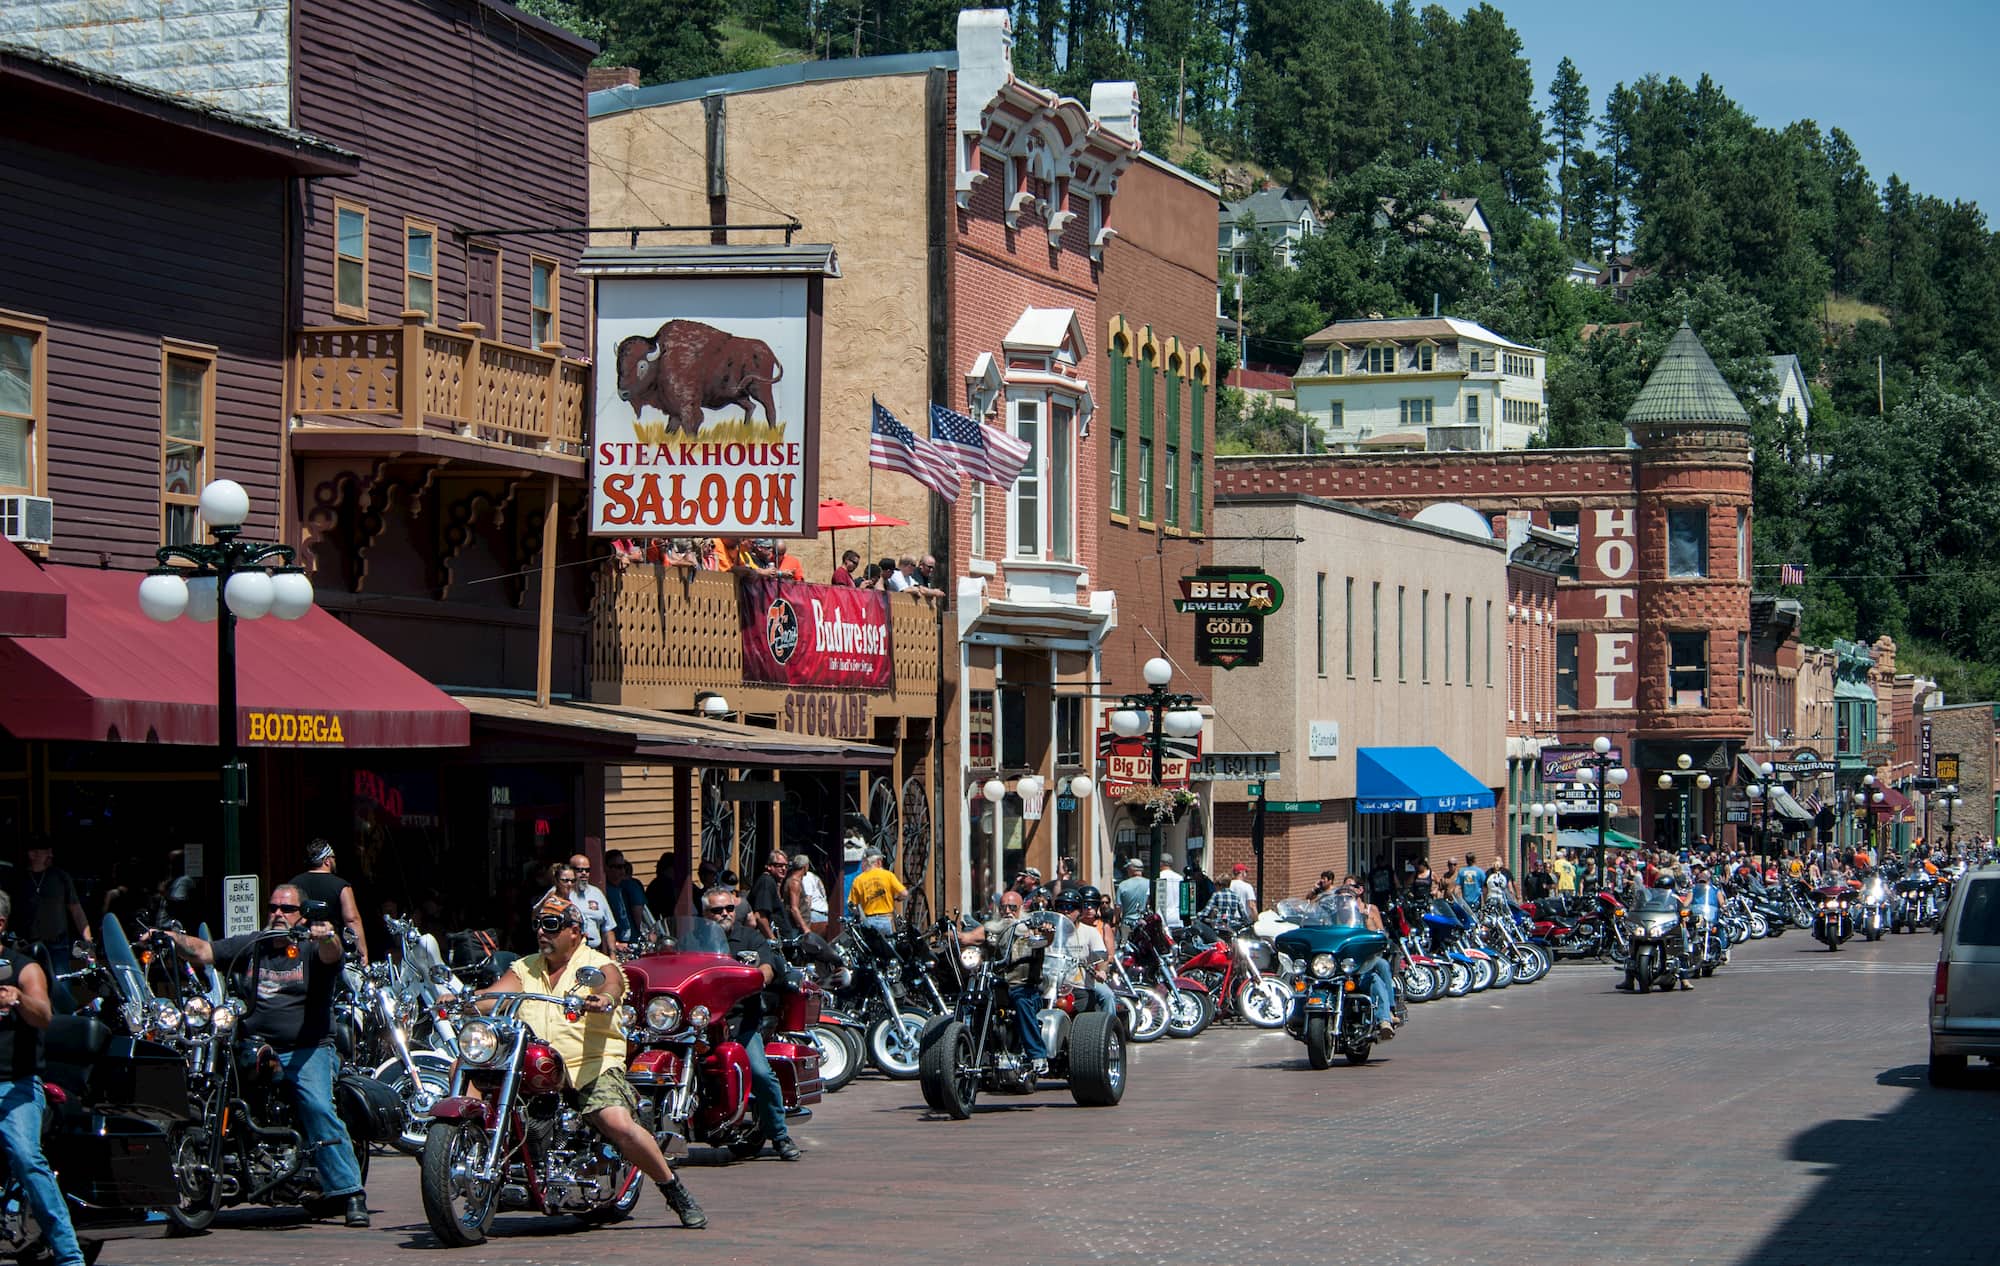 People on motorcycles next to buildings during sturgis motorcycle rally